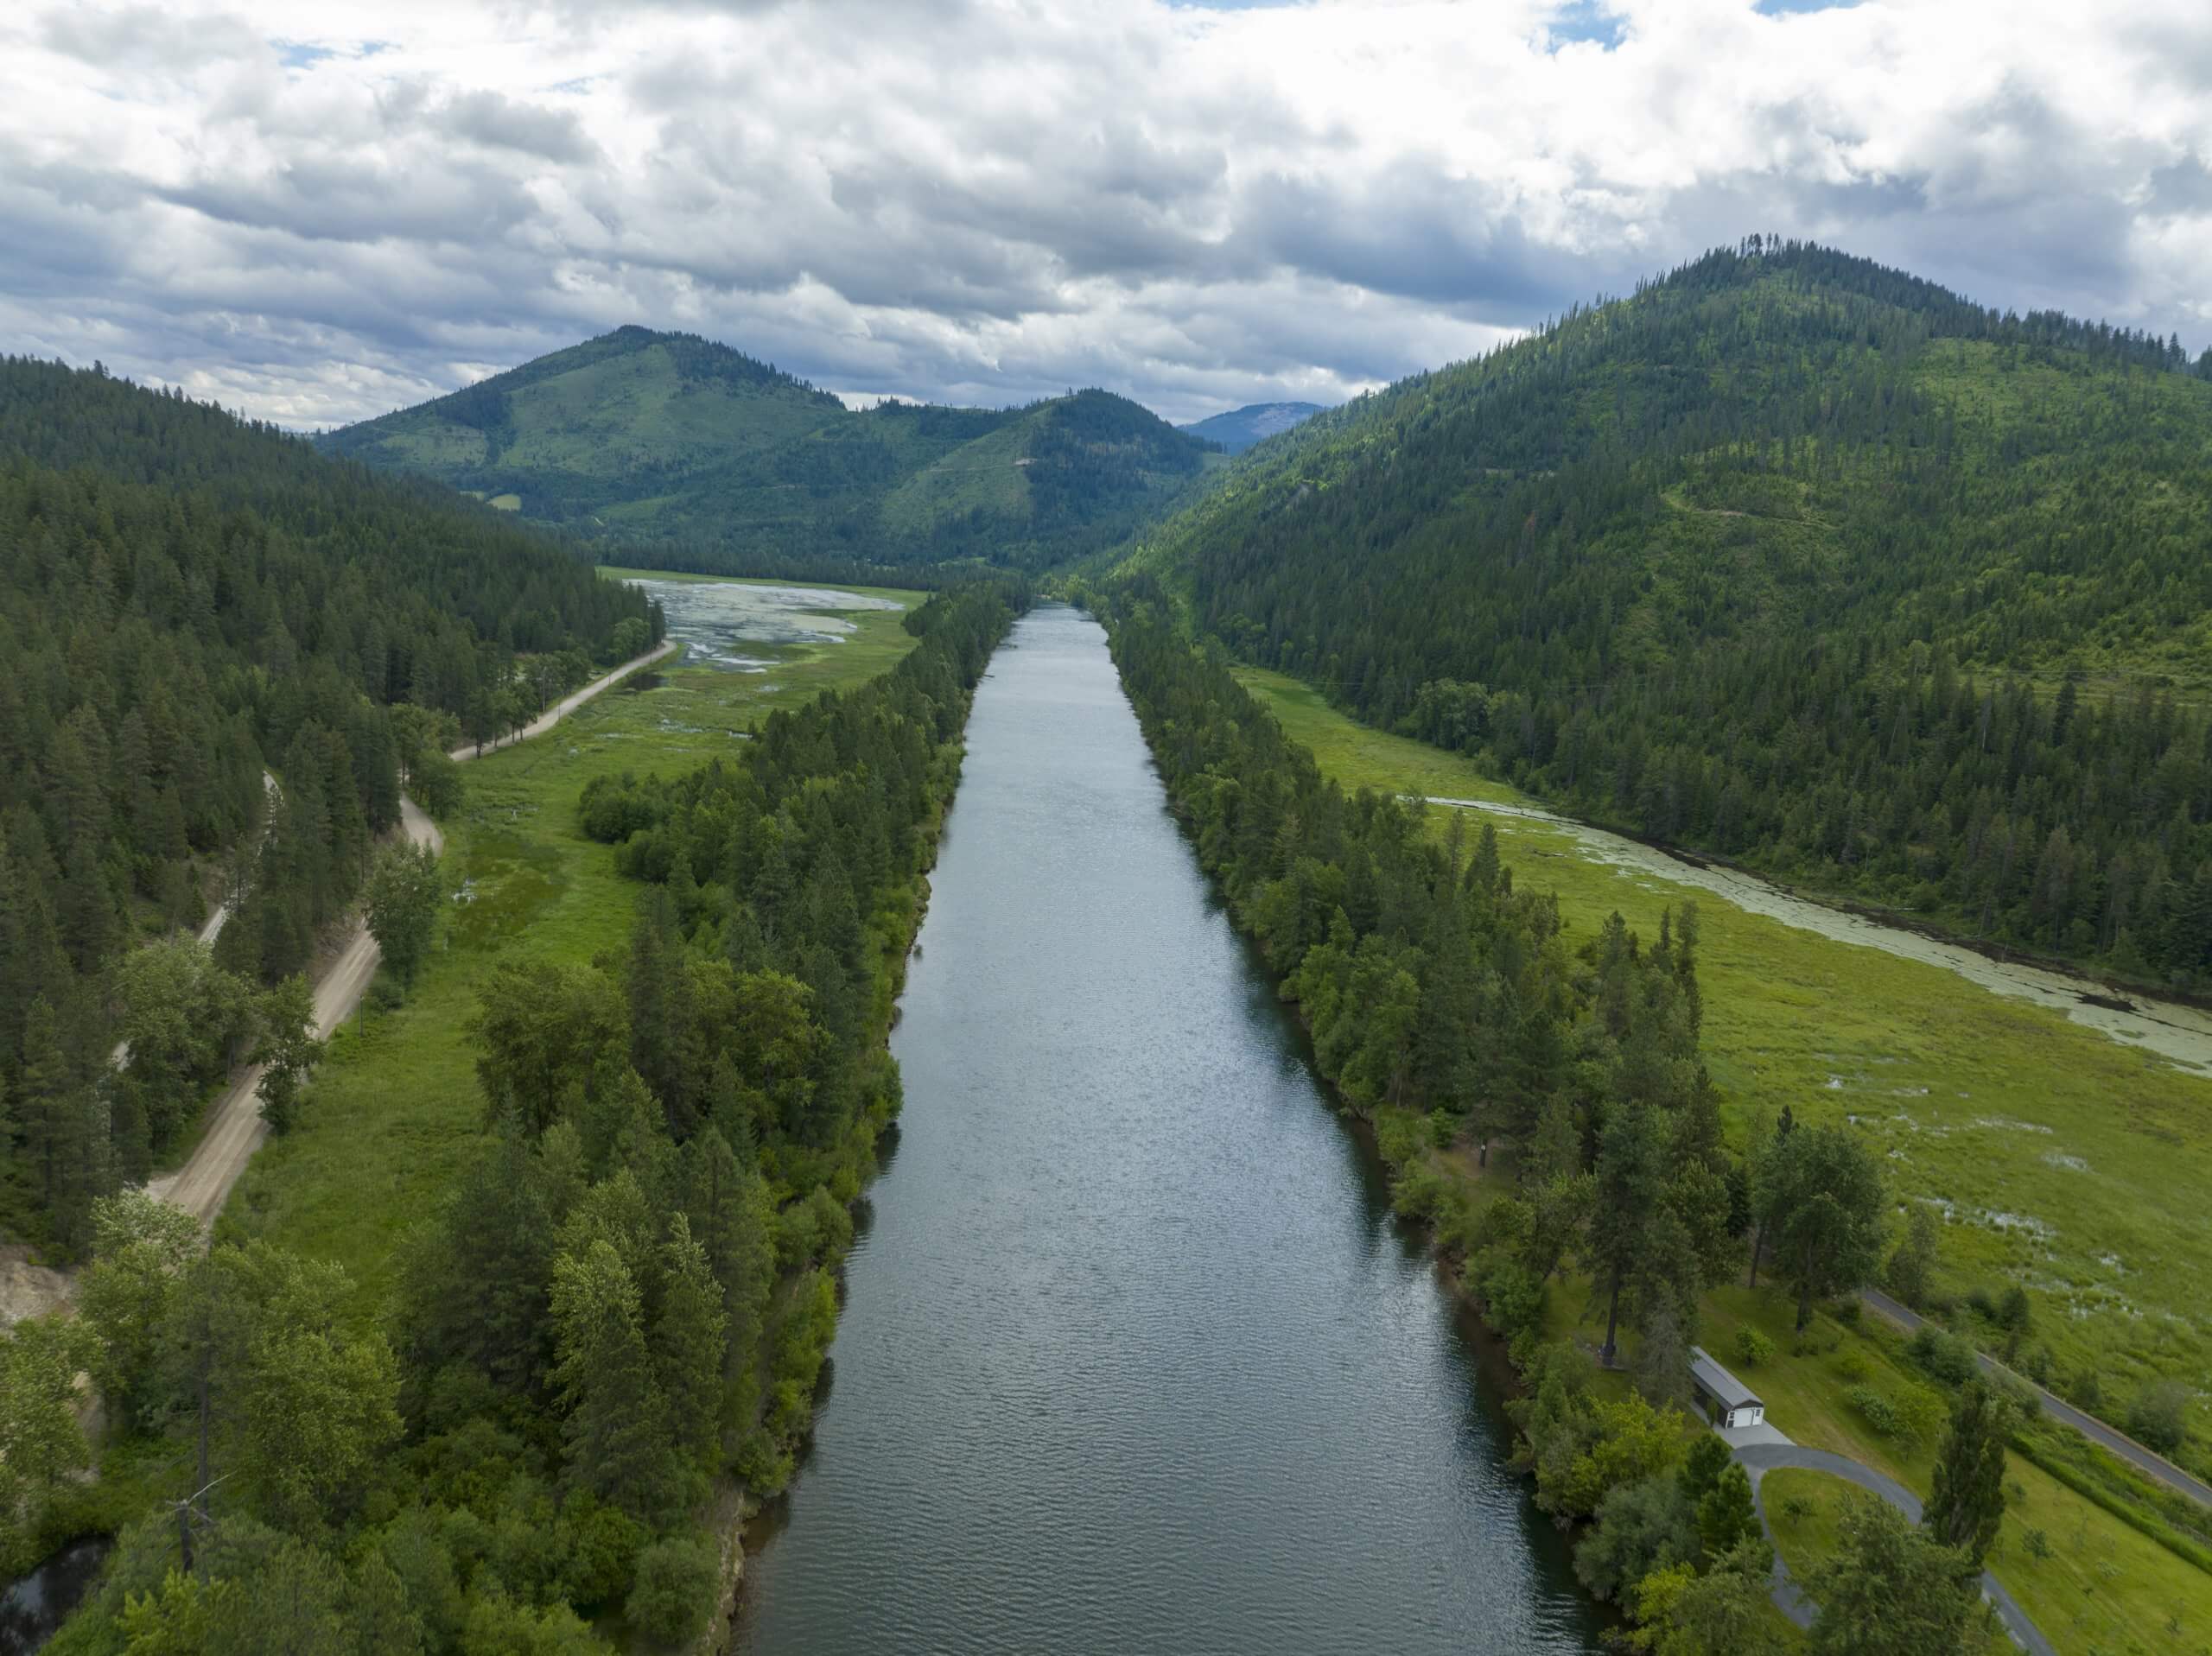 An aerial view of the Coeur d'Alene River.